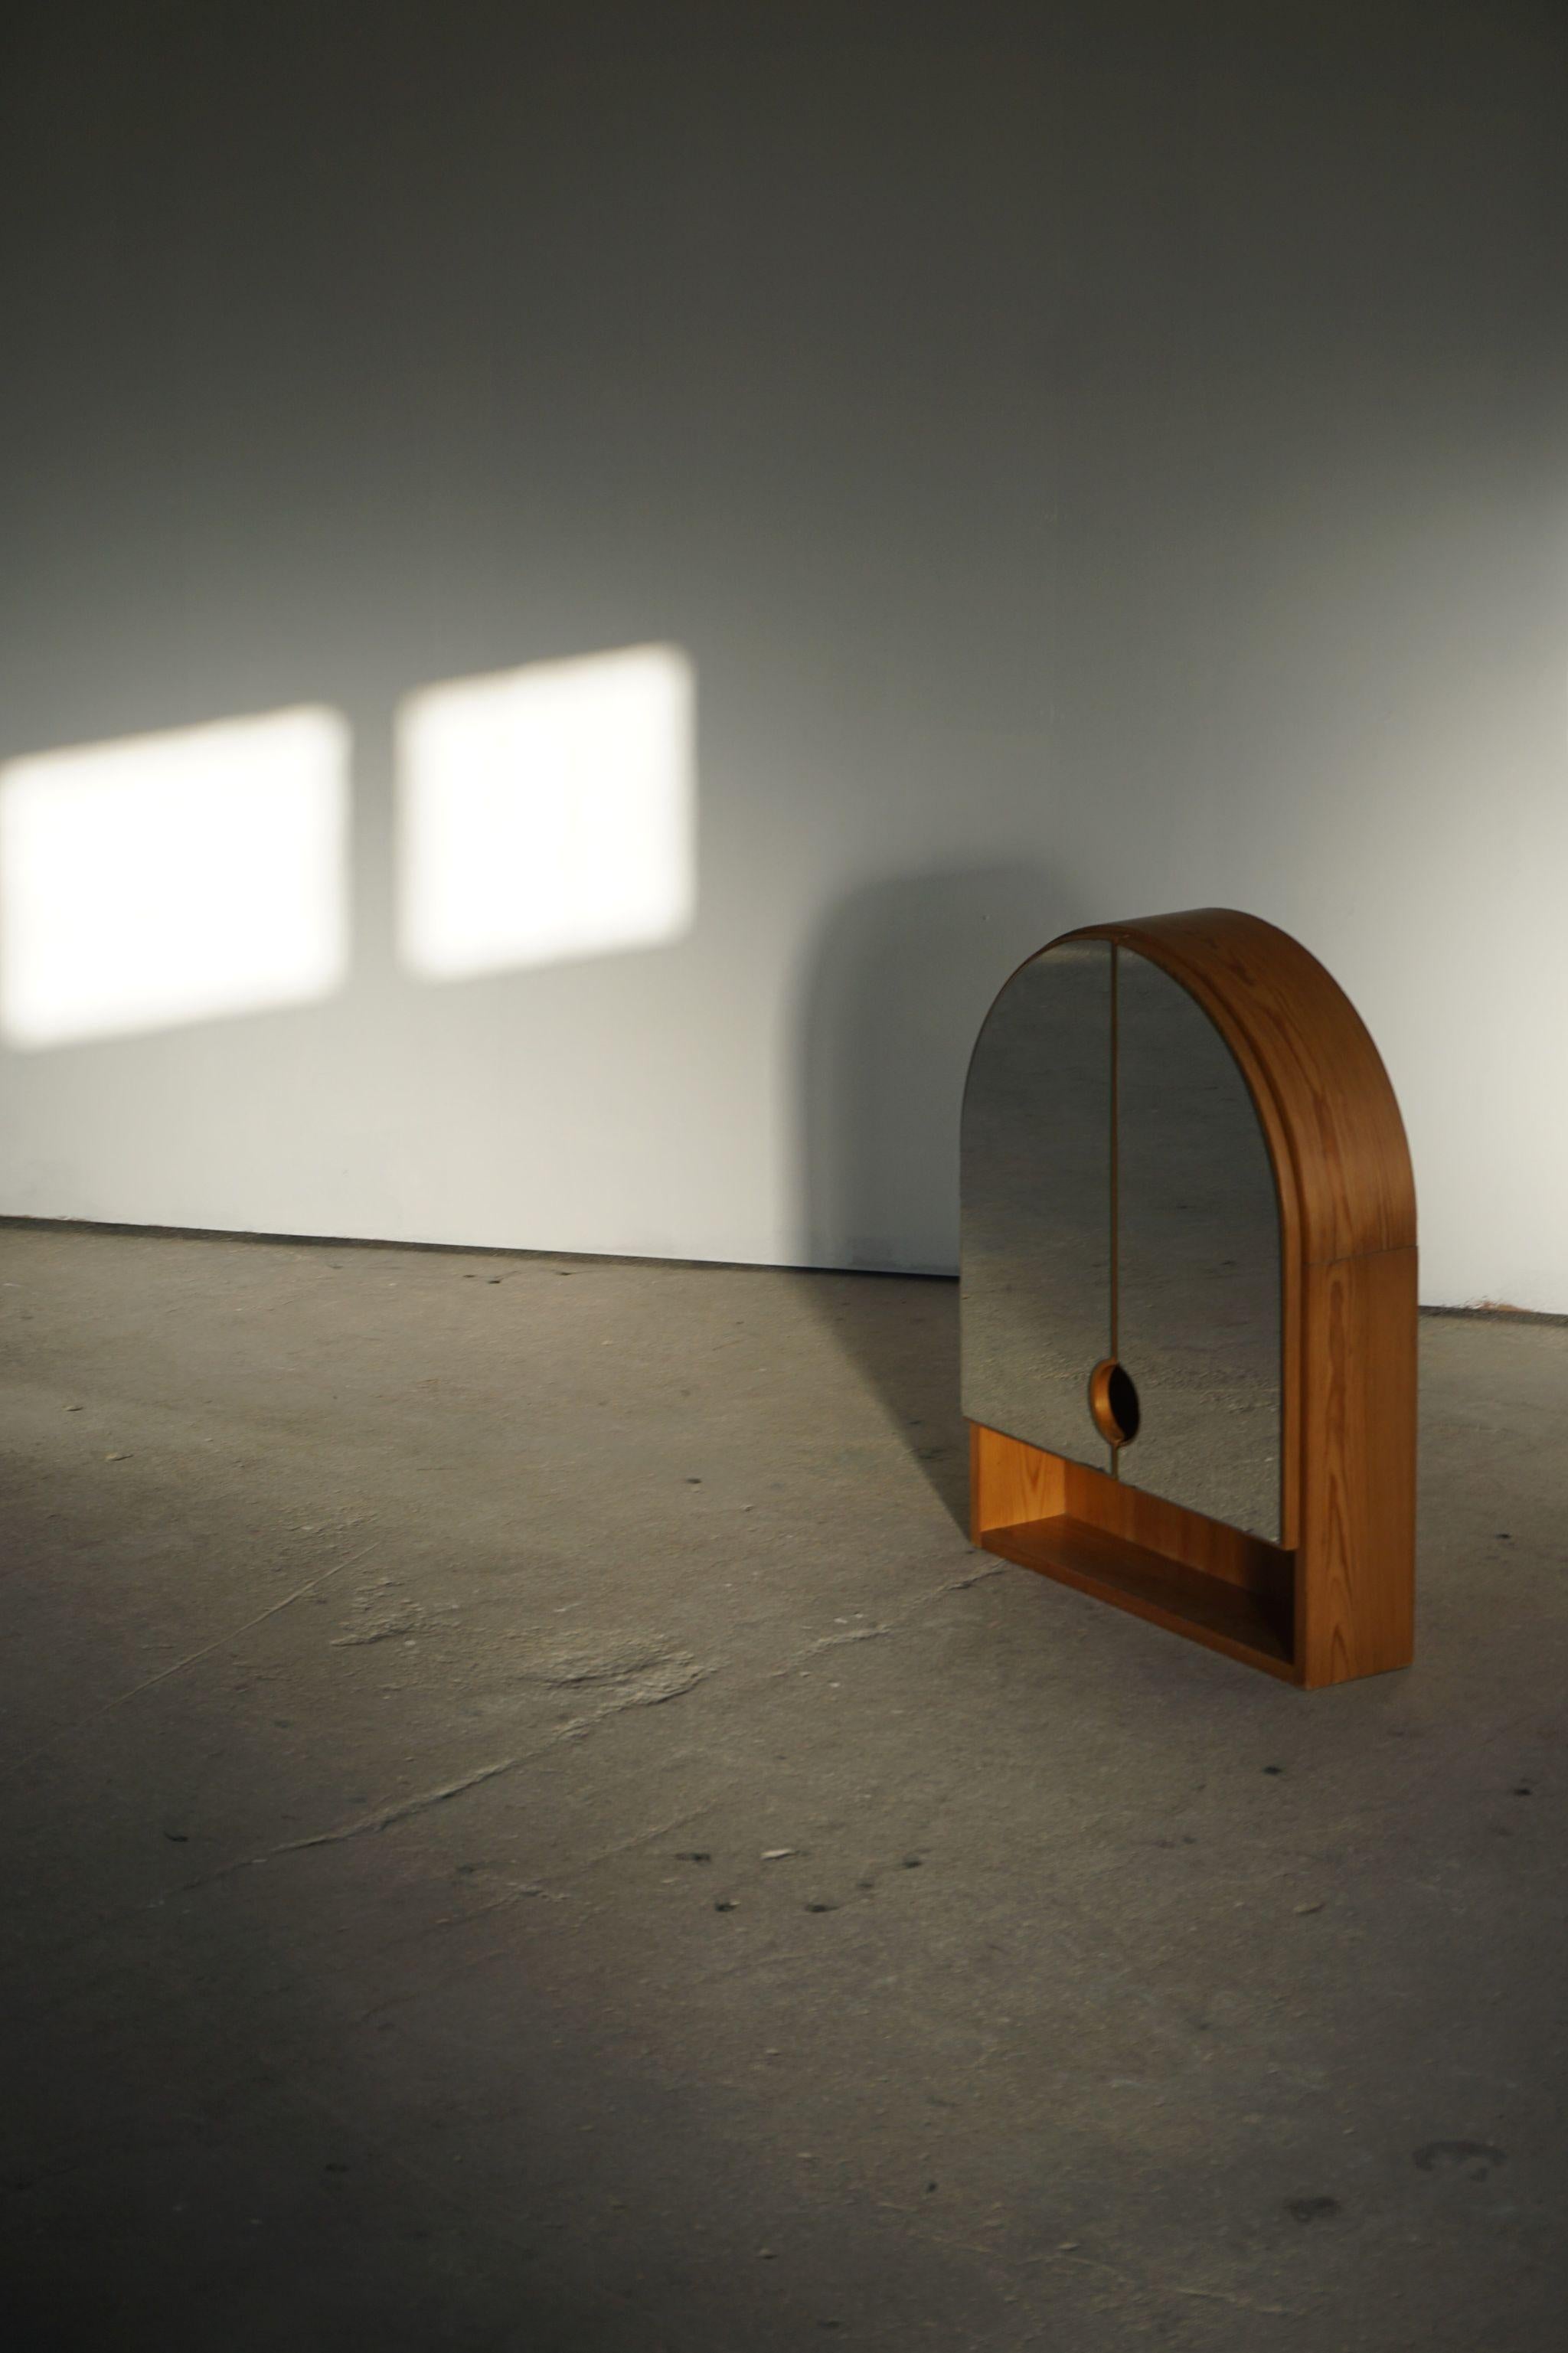 Late 20th Century Swedish Modern Wall Mirror in Pine, Unknown Cabinetmaker, 1970s